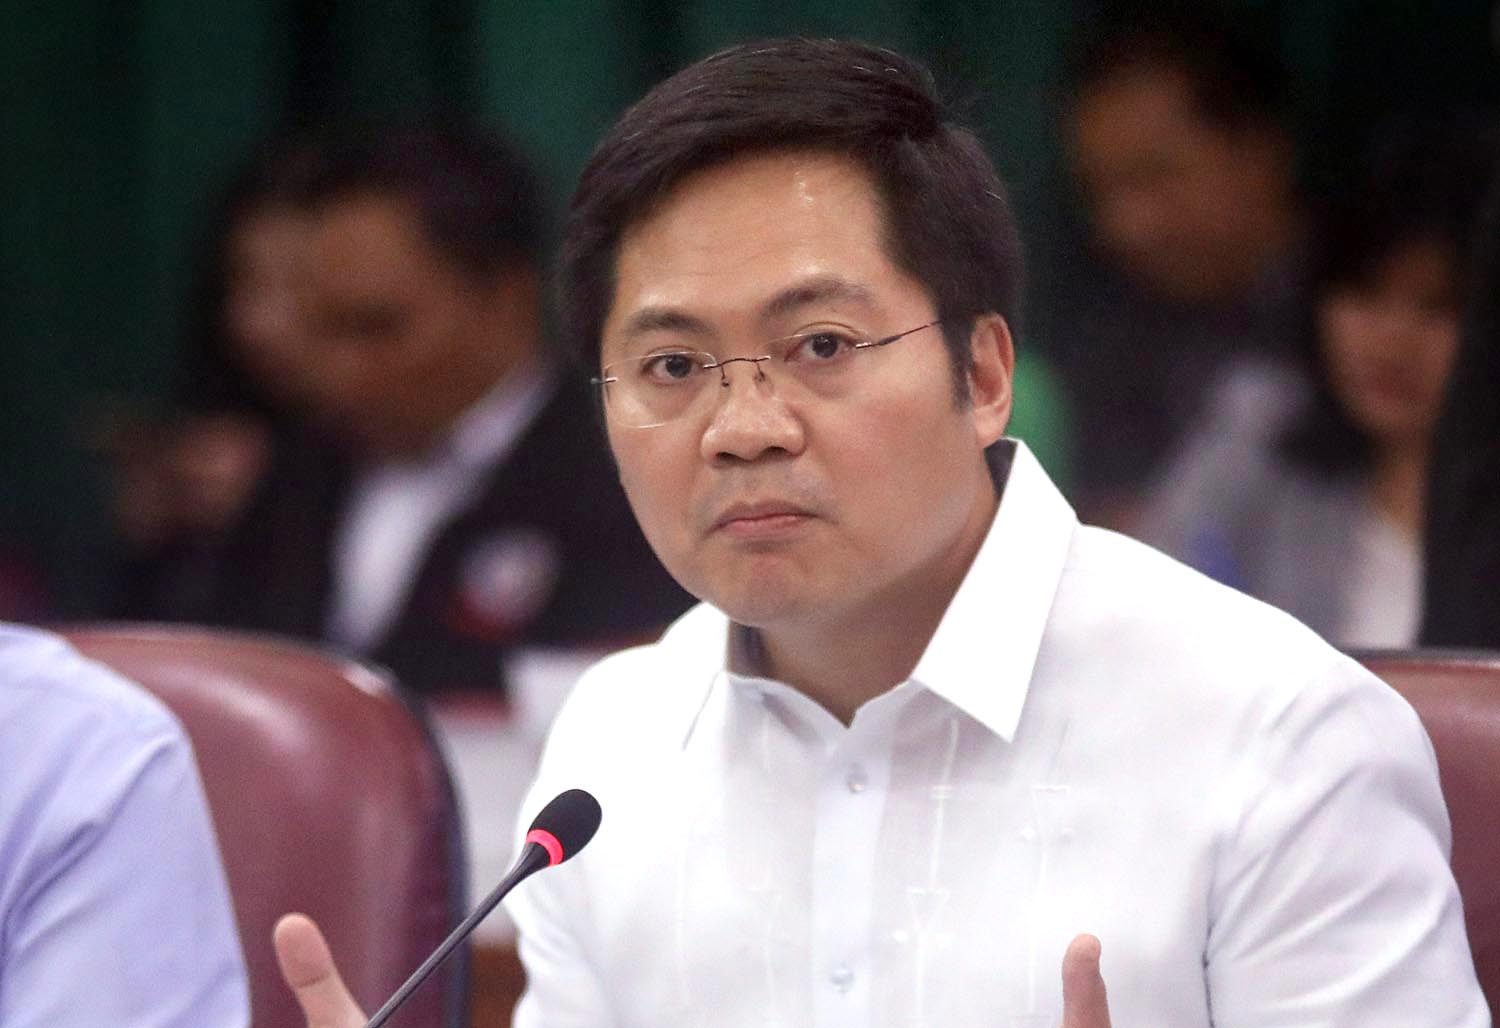 Karlo Nograles to be kicked out as appropriations panel chair